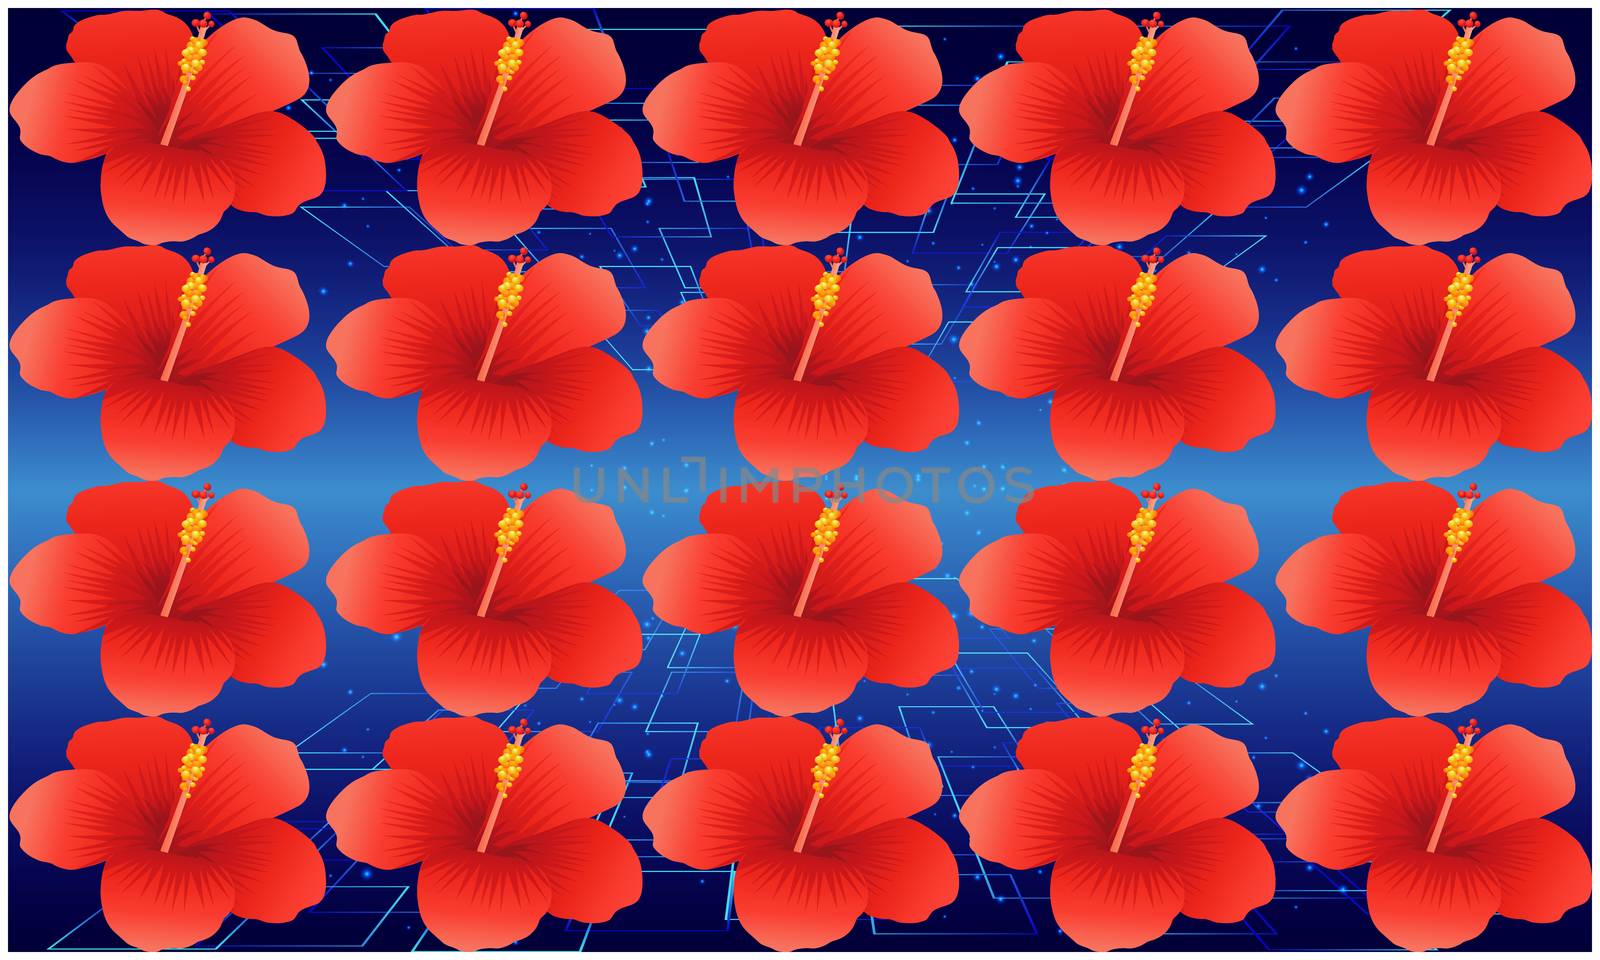 digital textile design of flowers on abstract background